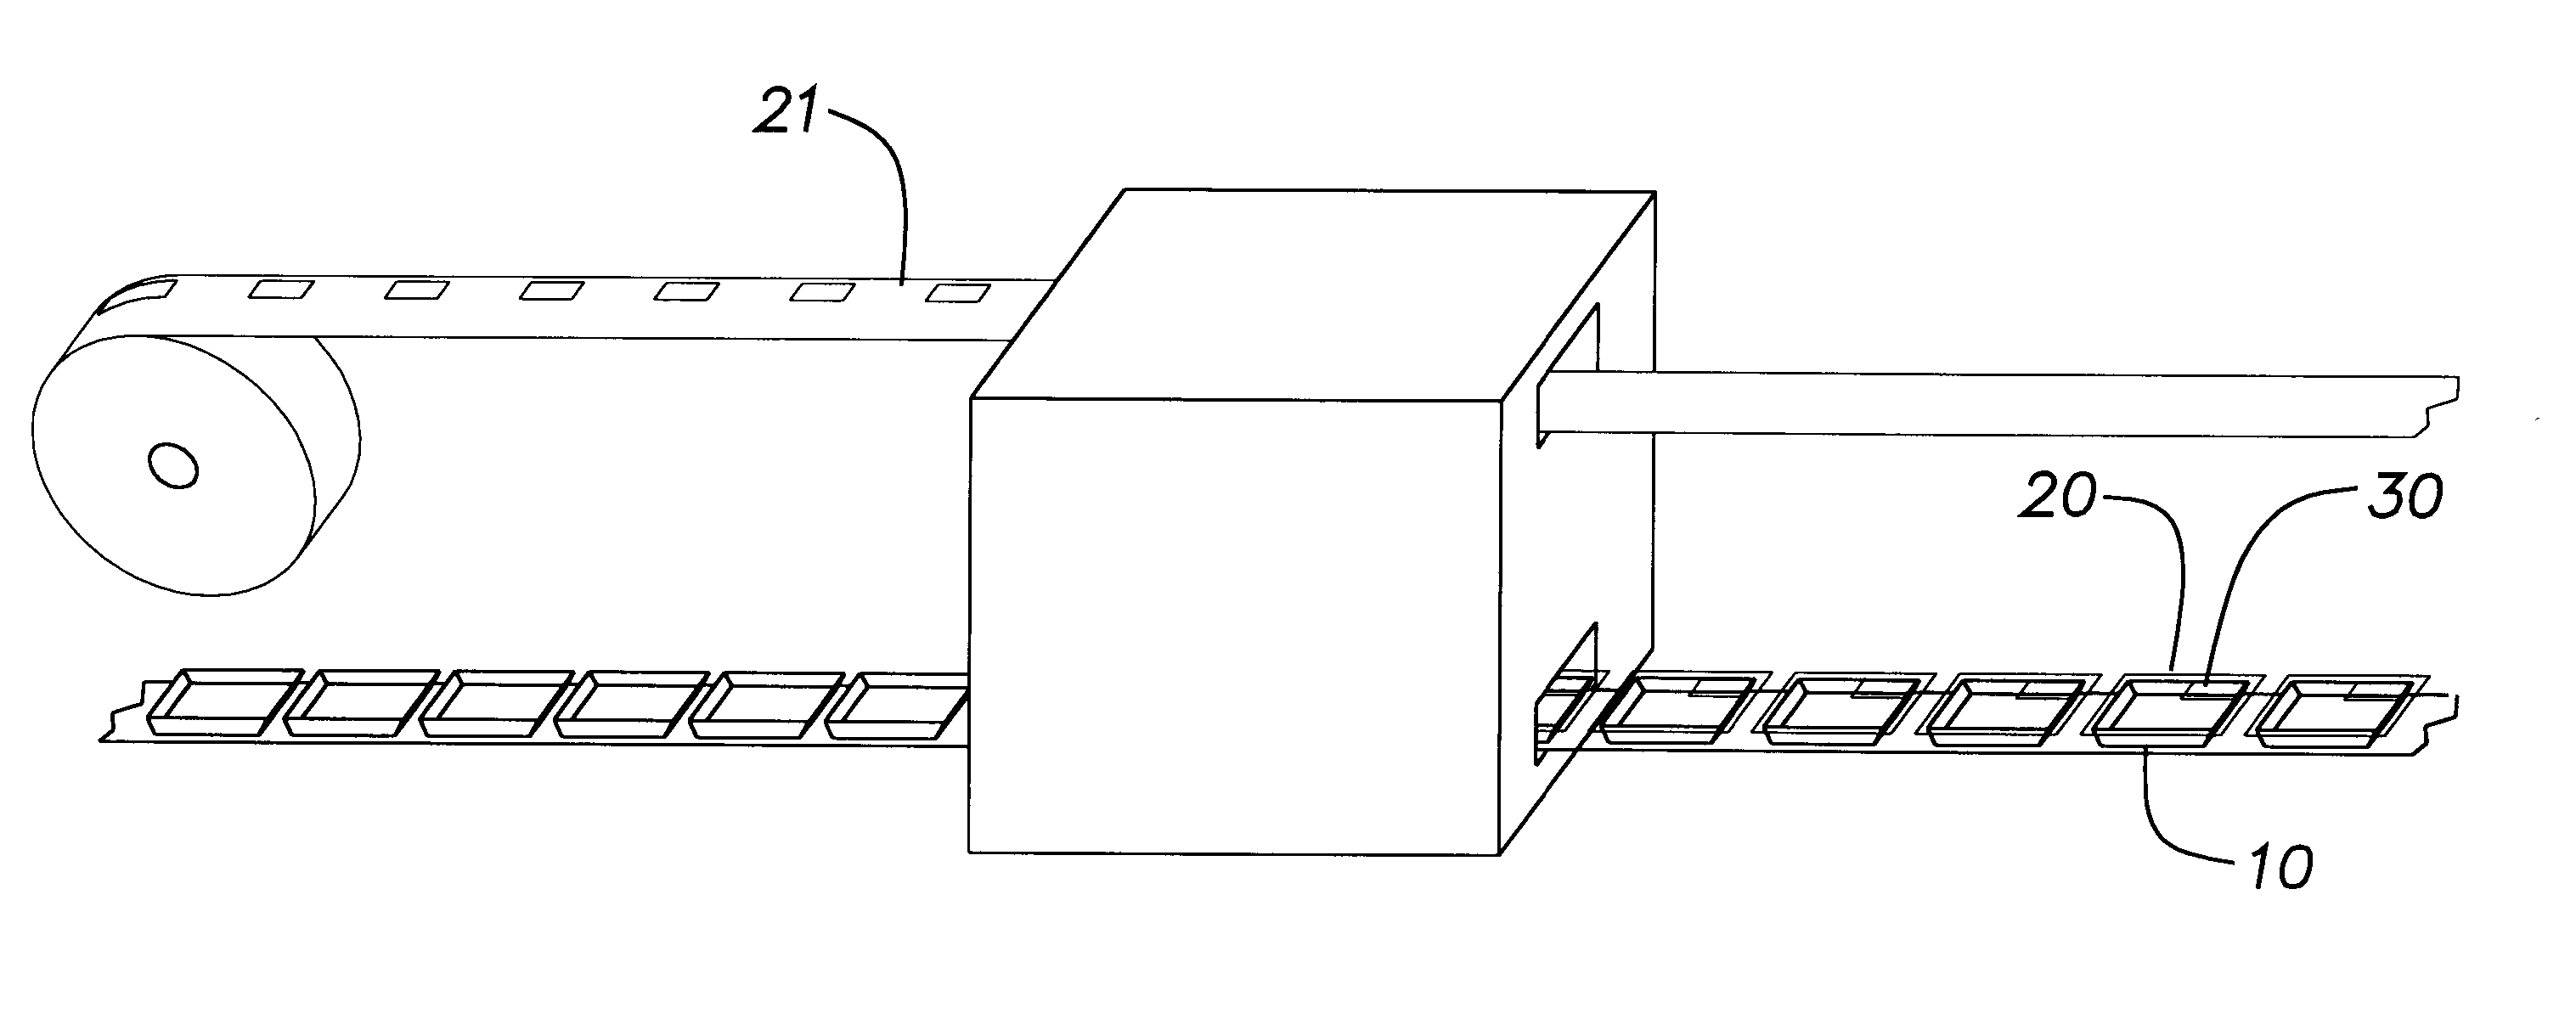 Method for applying microwave shield to cover of microwavable food container